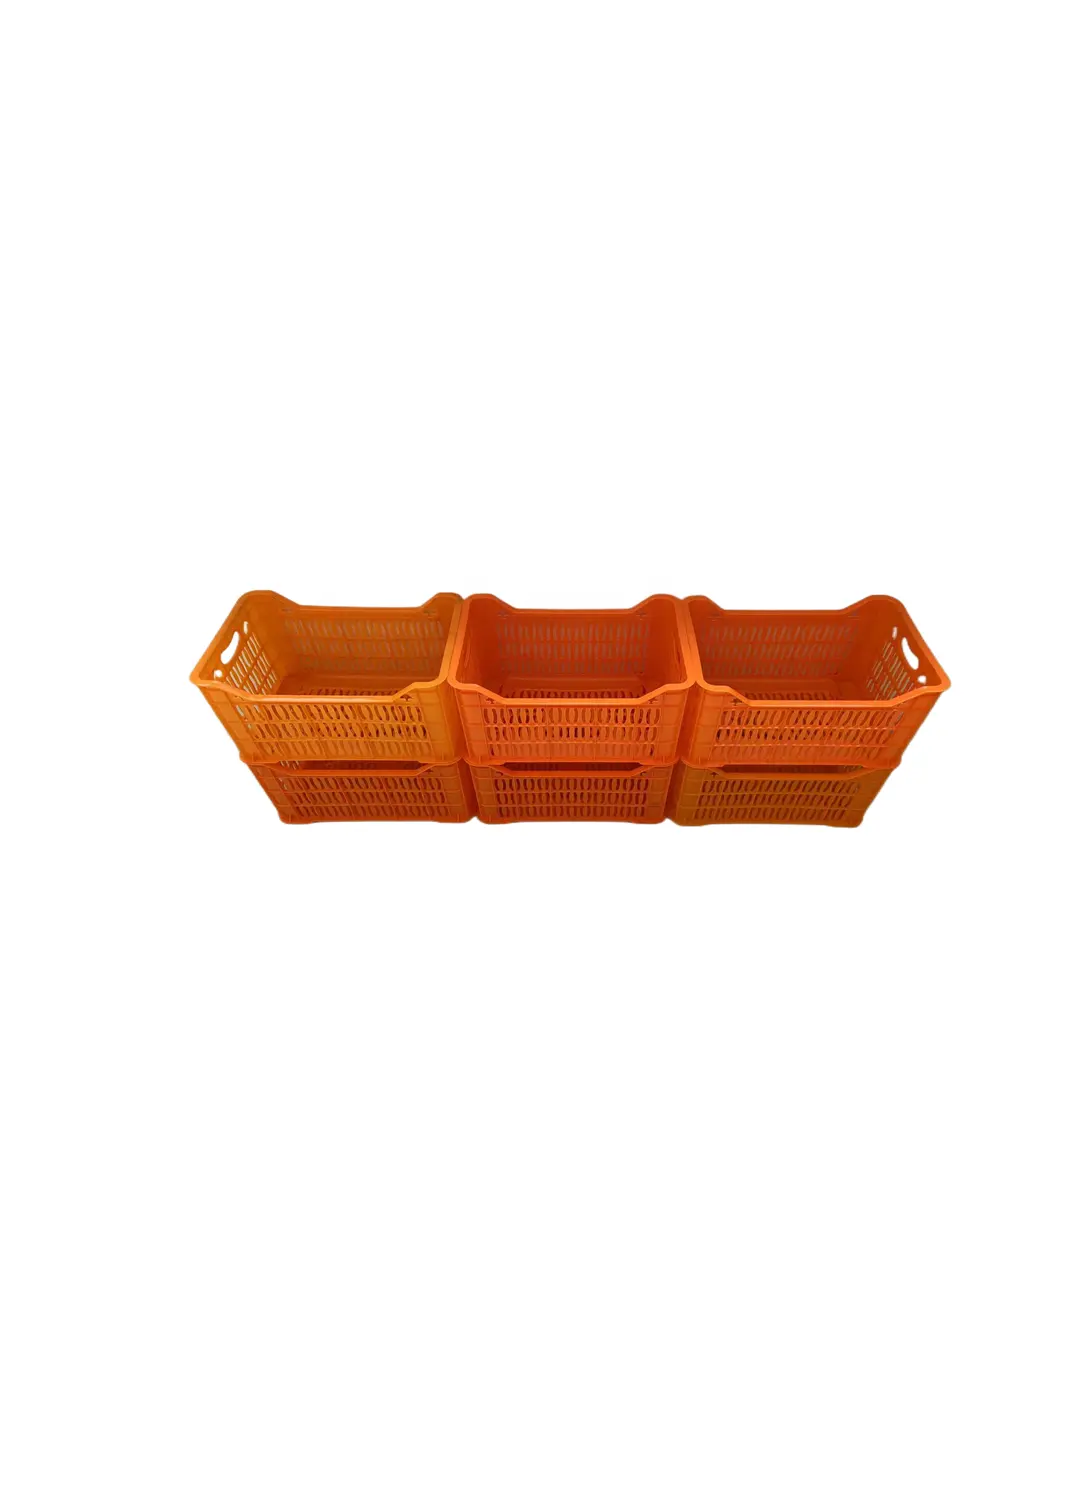 Custom Injection Mold for Fruit and Vegetable Crate Box Plastic Mould for Manufacturing